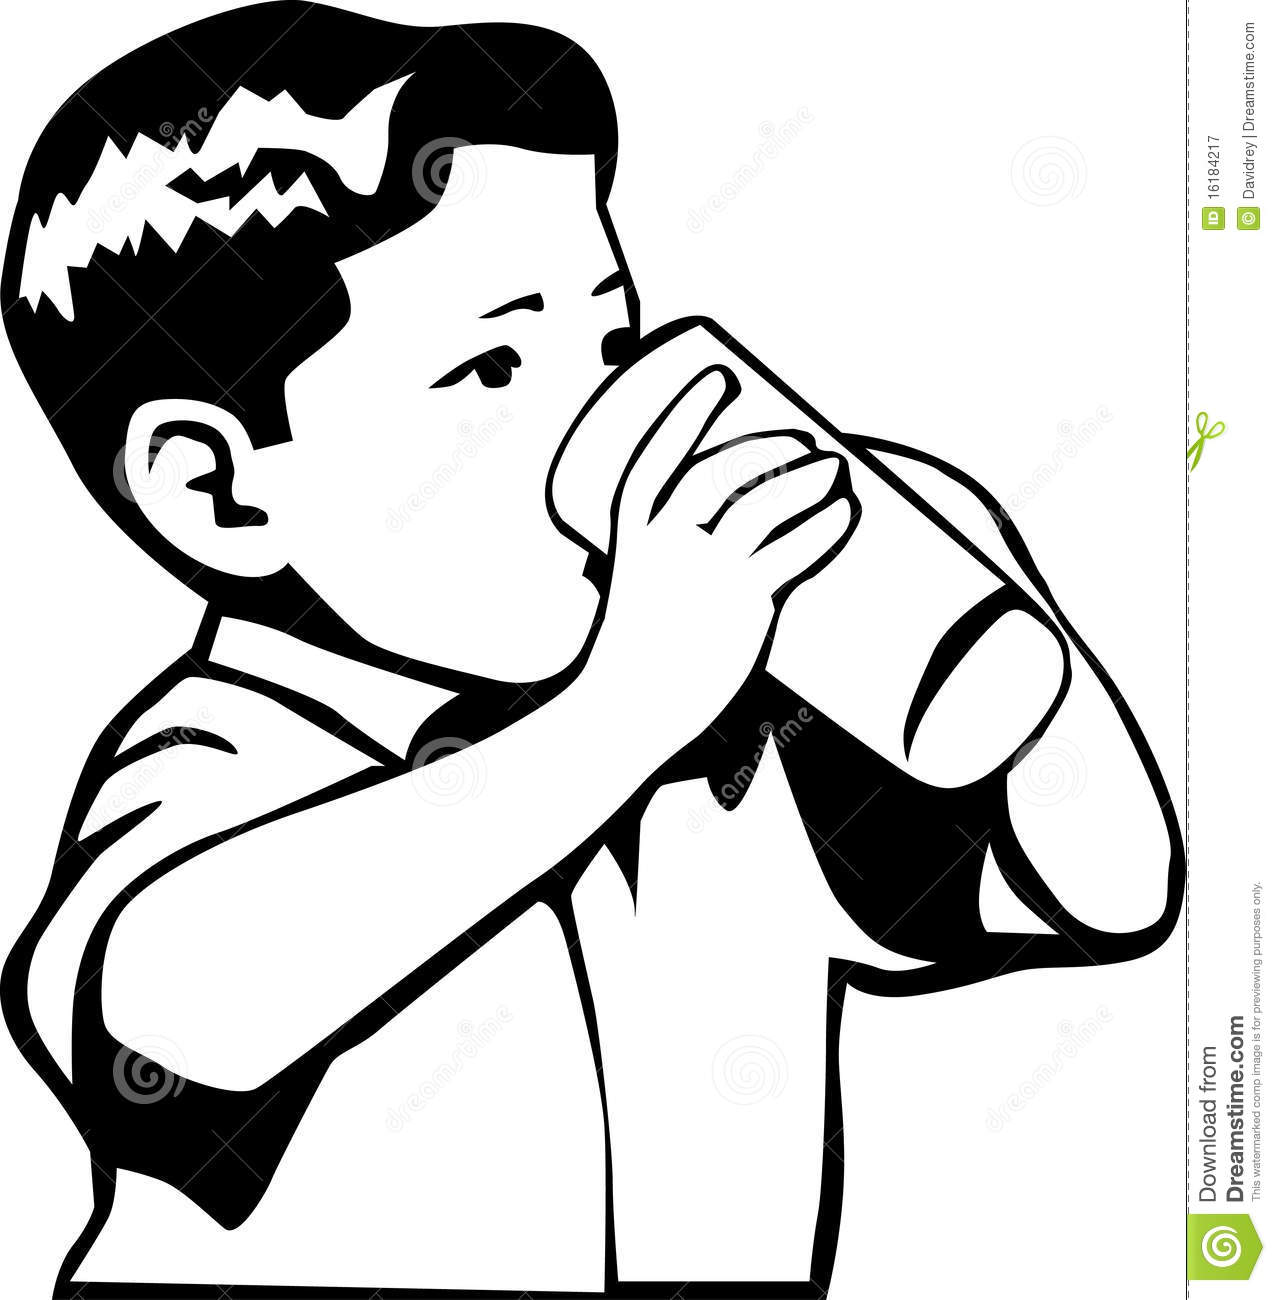 And White Retro Style Illustration Of A Boy Drinking Water Or Milk